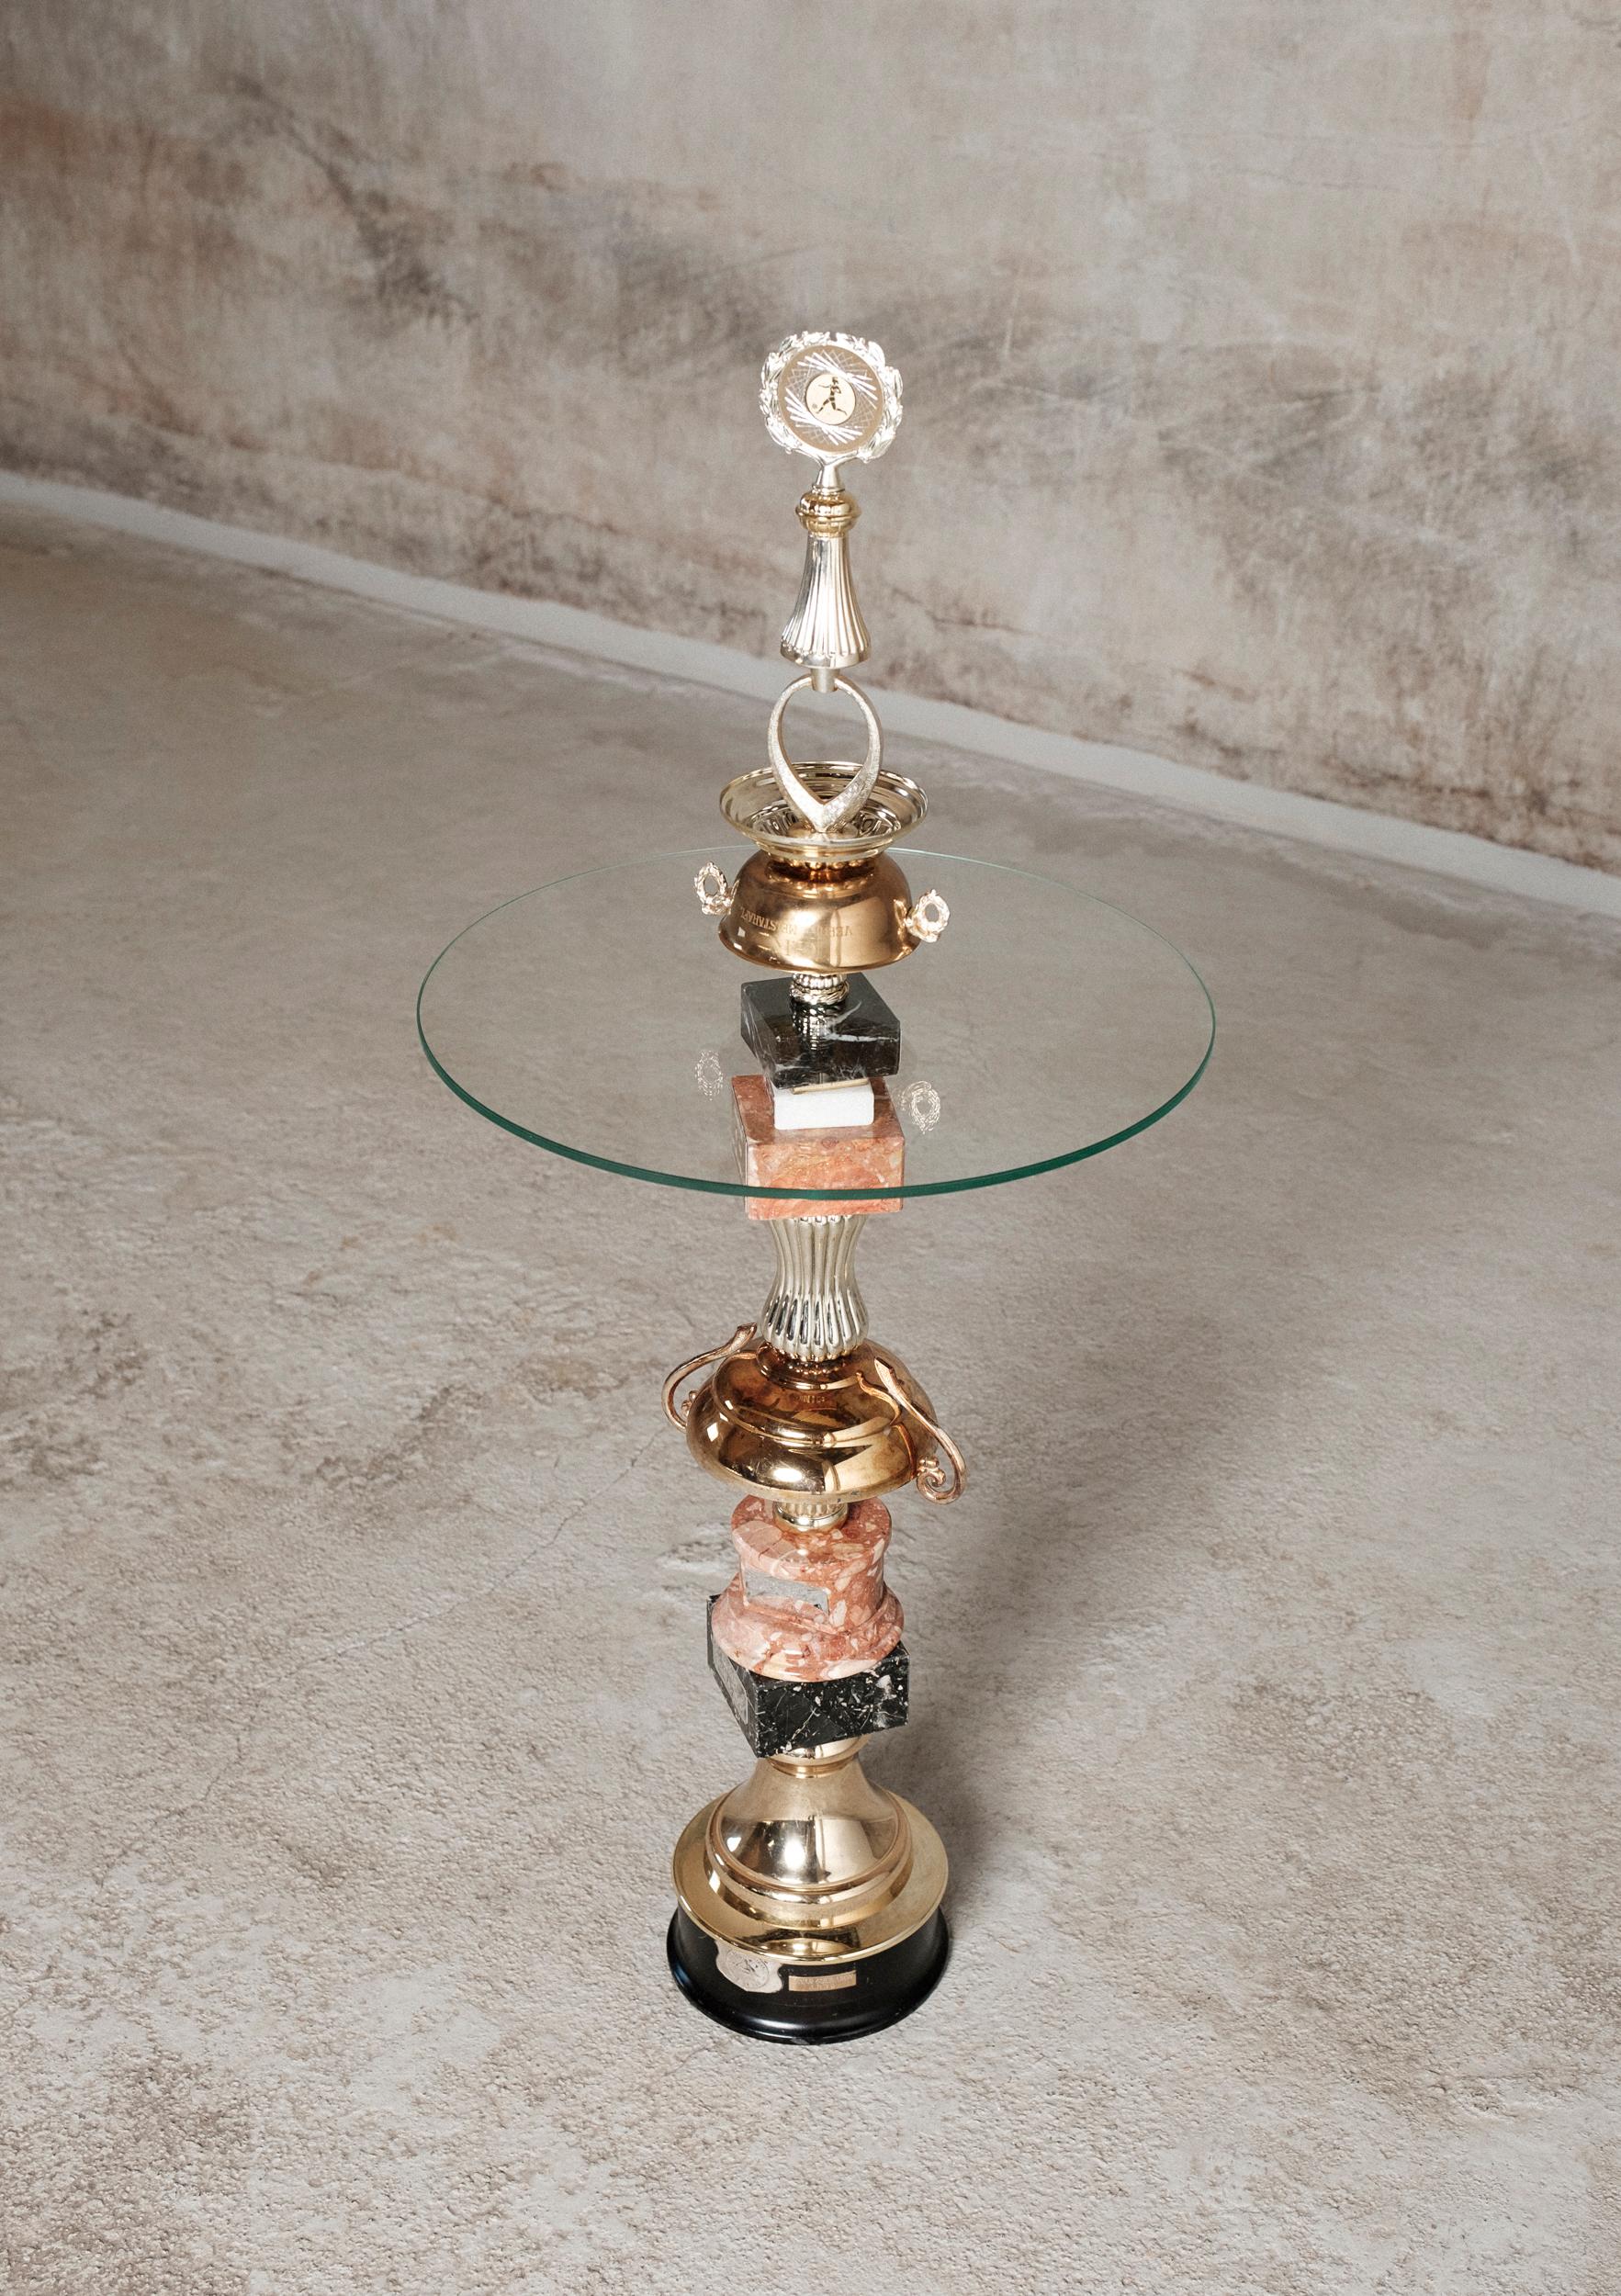 The Olive Wreath Table by Flétta
Dimensions: 87 x 62 cm
Materials: Gold, silver, pink marble

Trophy is a collection of tables, lights, flowerpots and shelves made of old trophies collected from athletes and sports clubs in Iceland. Trophies are